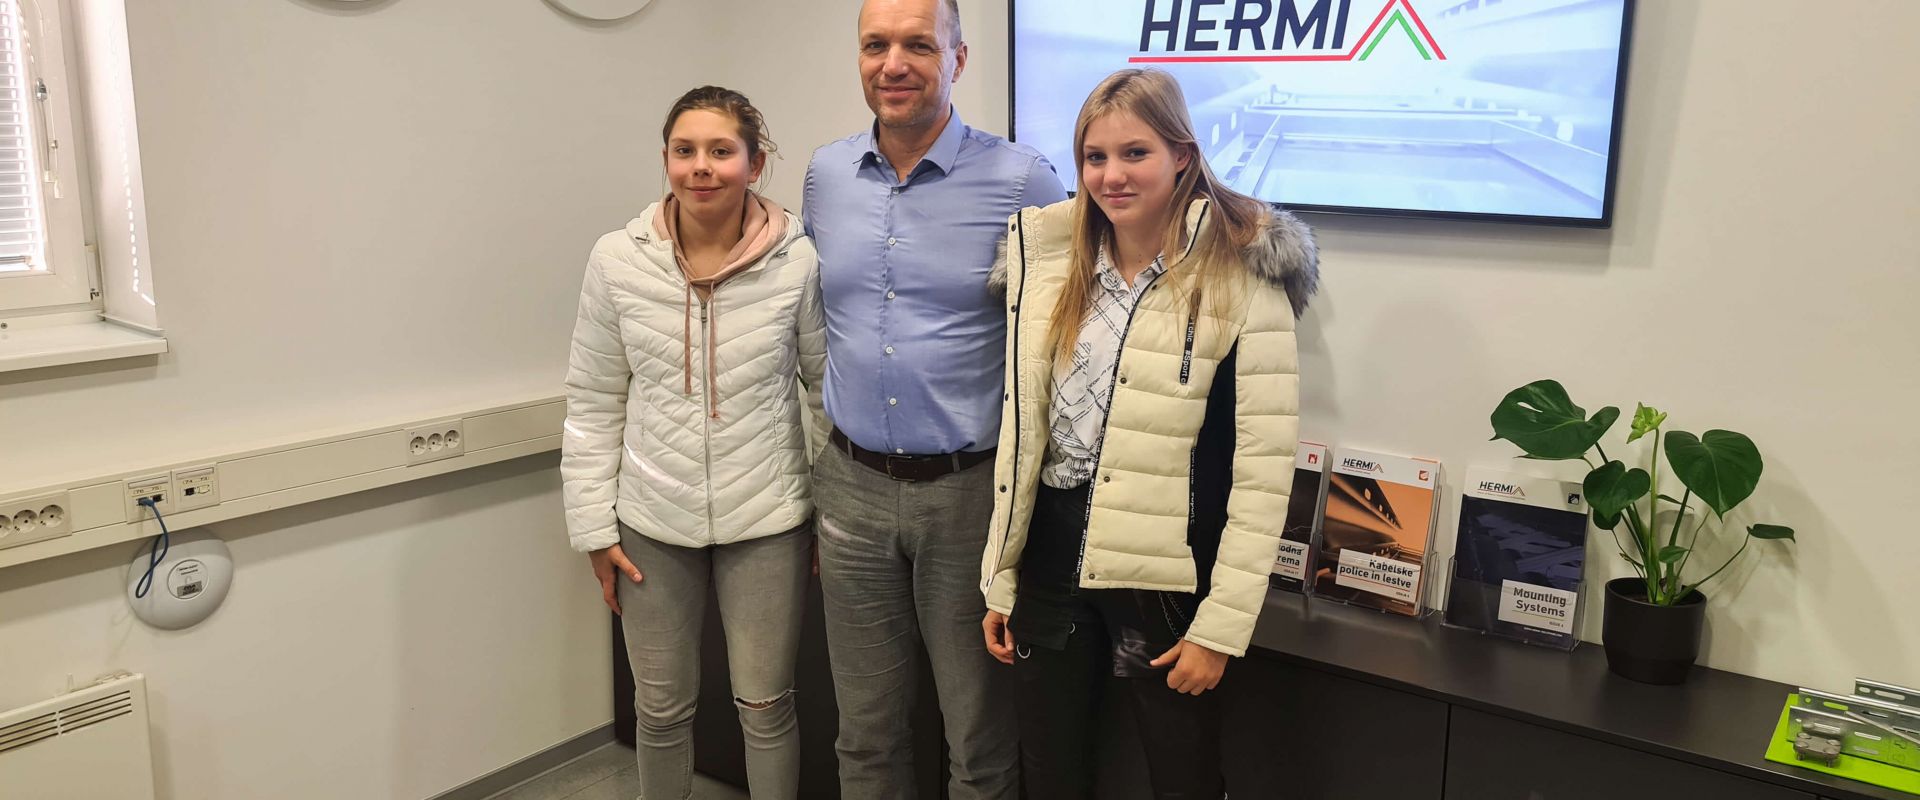 Hermi has awarded sports scholarships for the year 2022